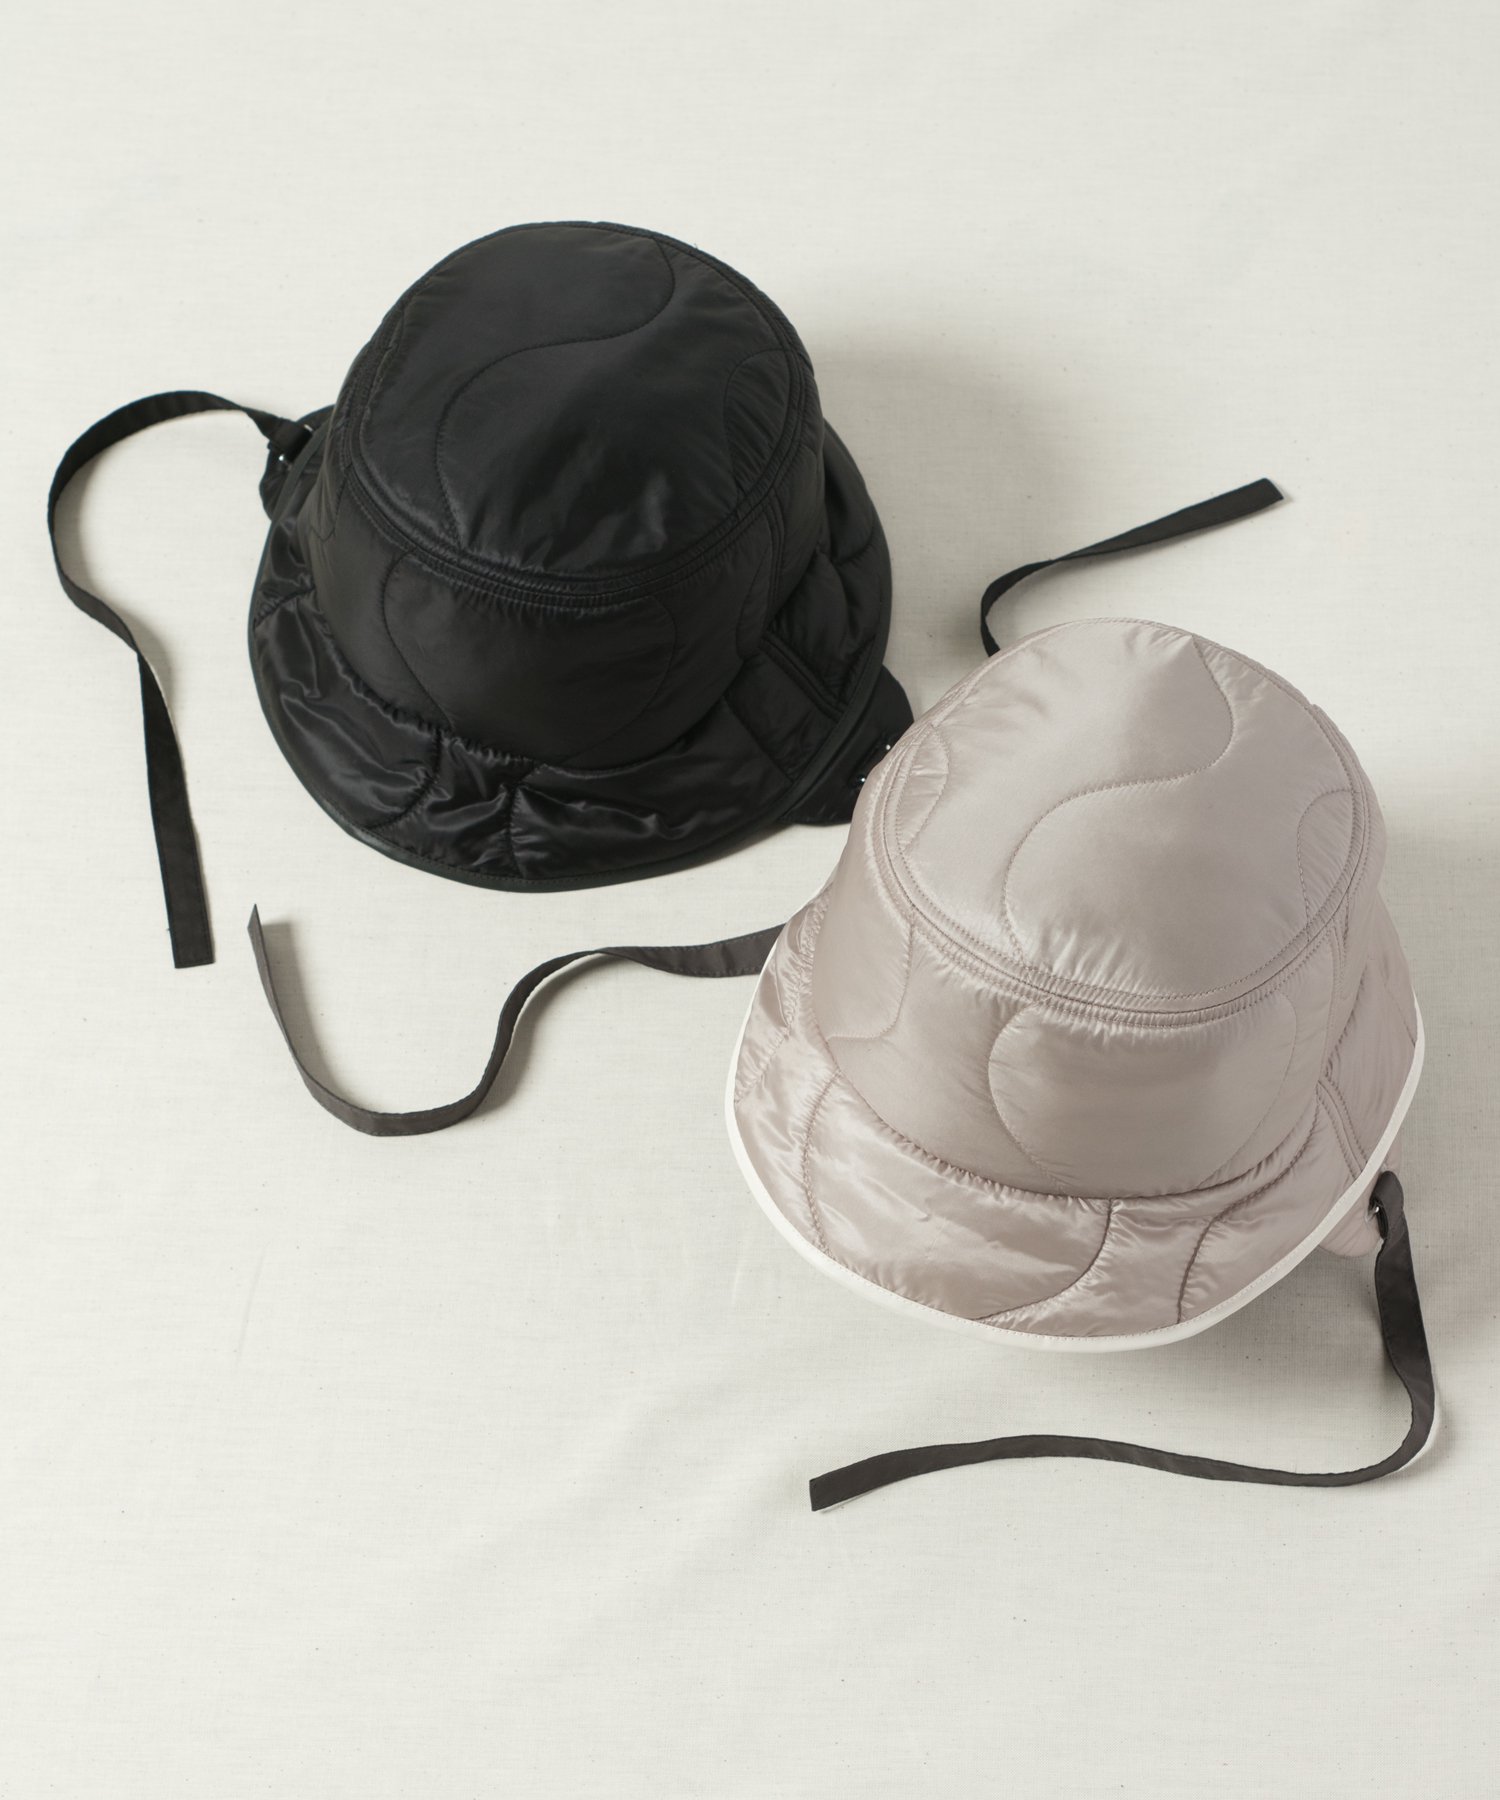 <img class='new_mark_img1' src='https://img.shop-pro.jp/img/new/icons20.gif' style='border:none;display:inline;margin:0px;padding:0px;width:auto;' />Indietro Association Quilting Bucket Hat 02920 キルティングバケットハット